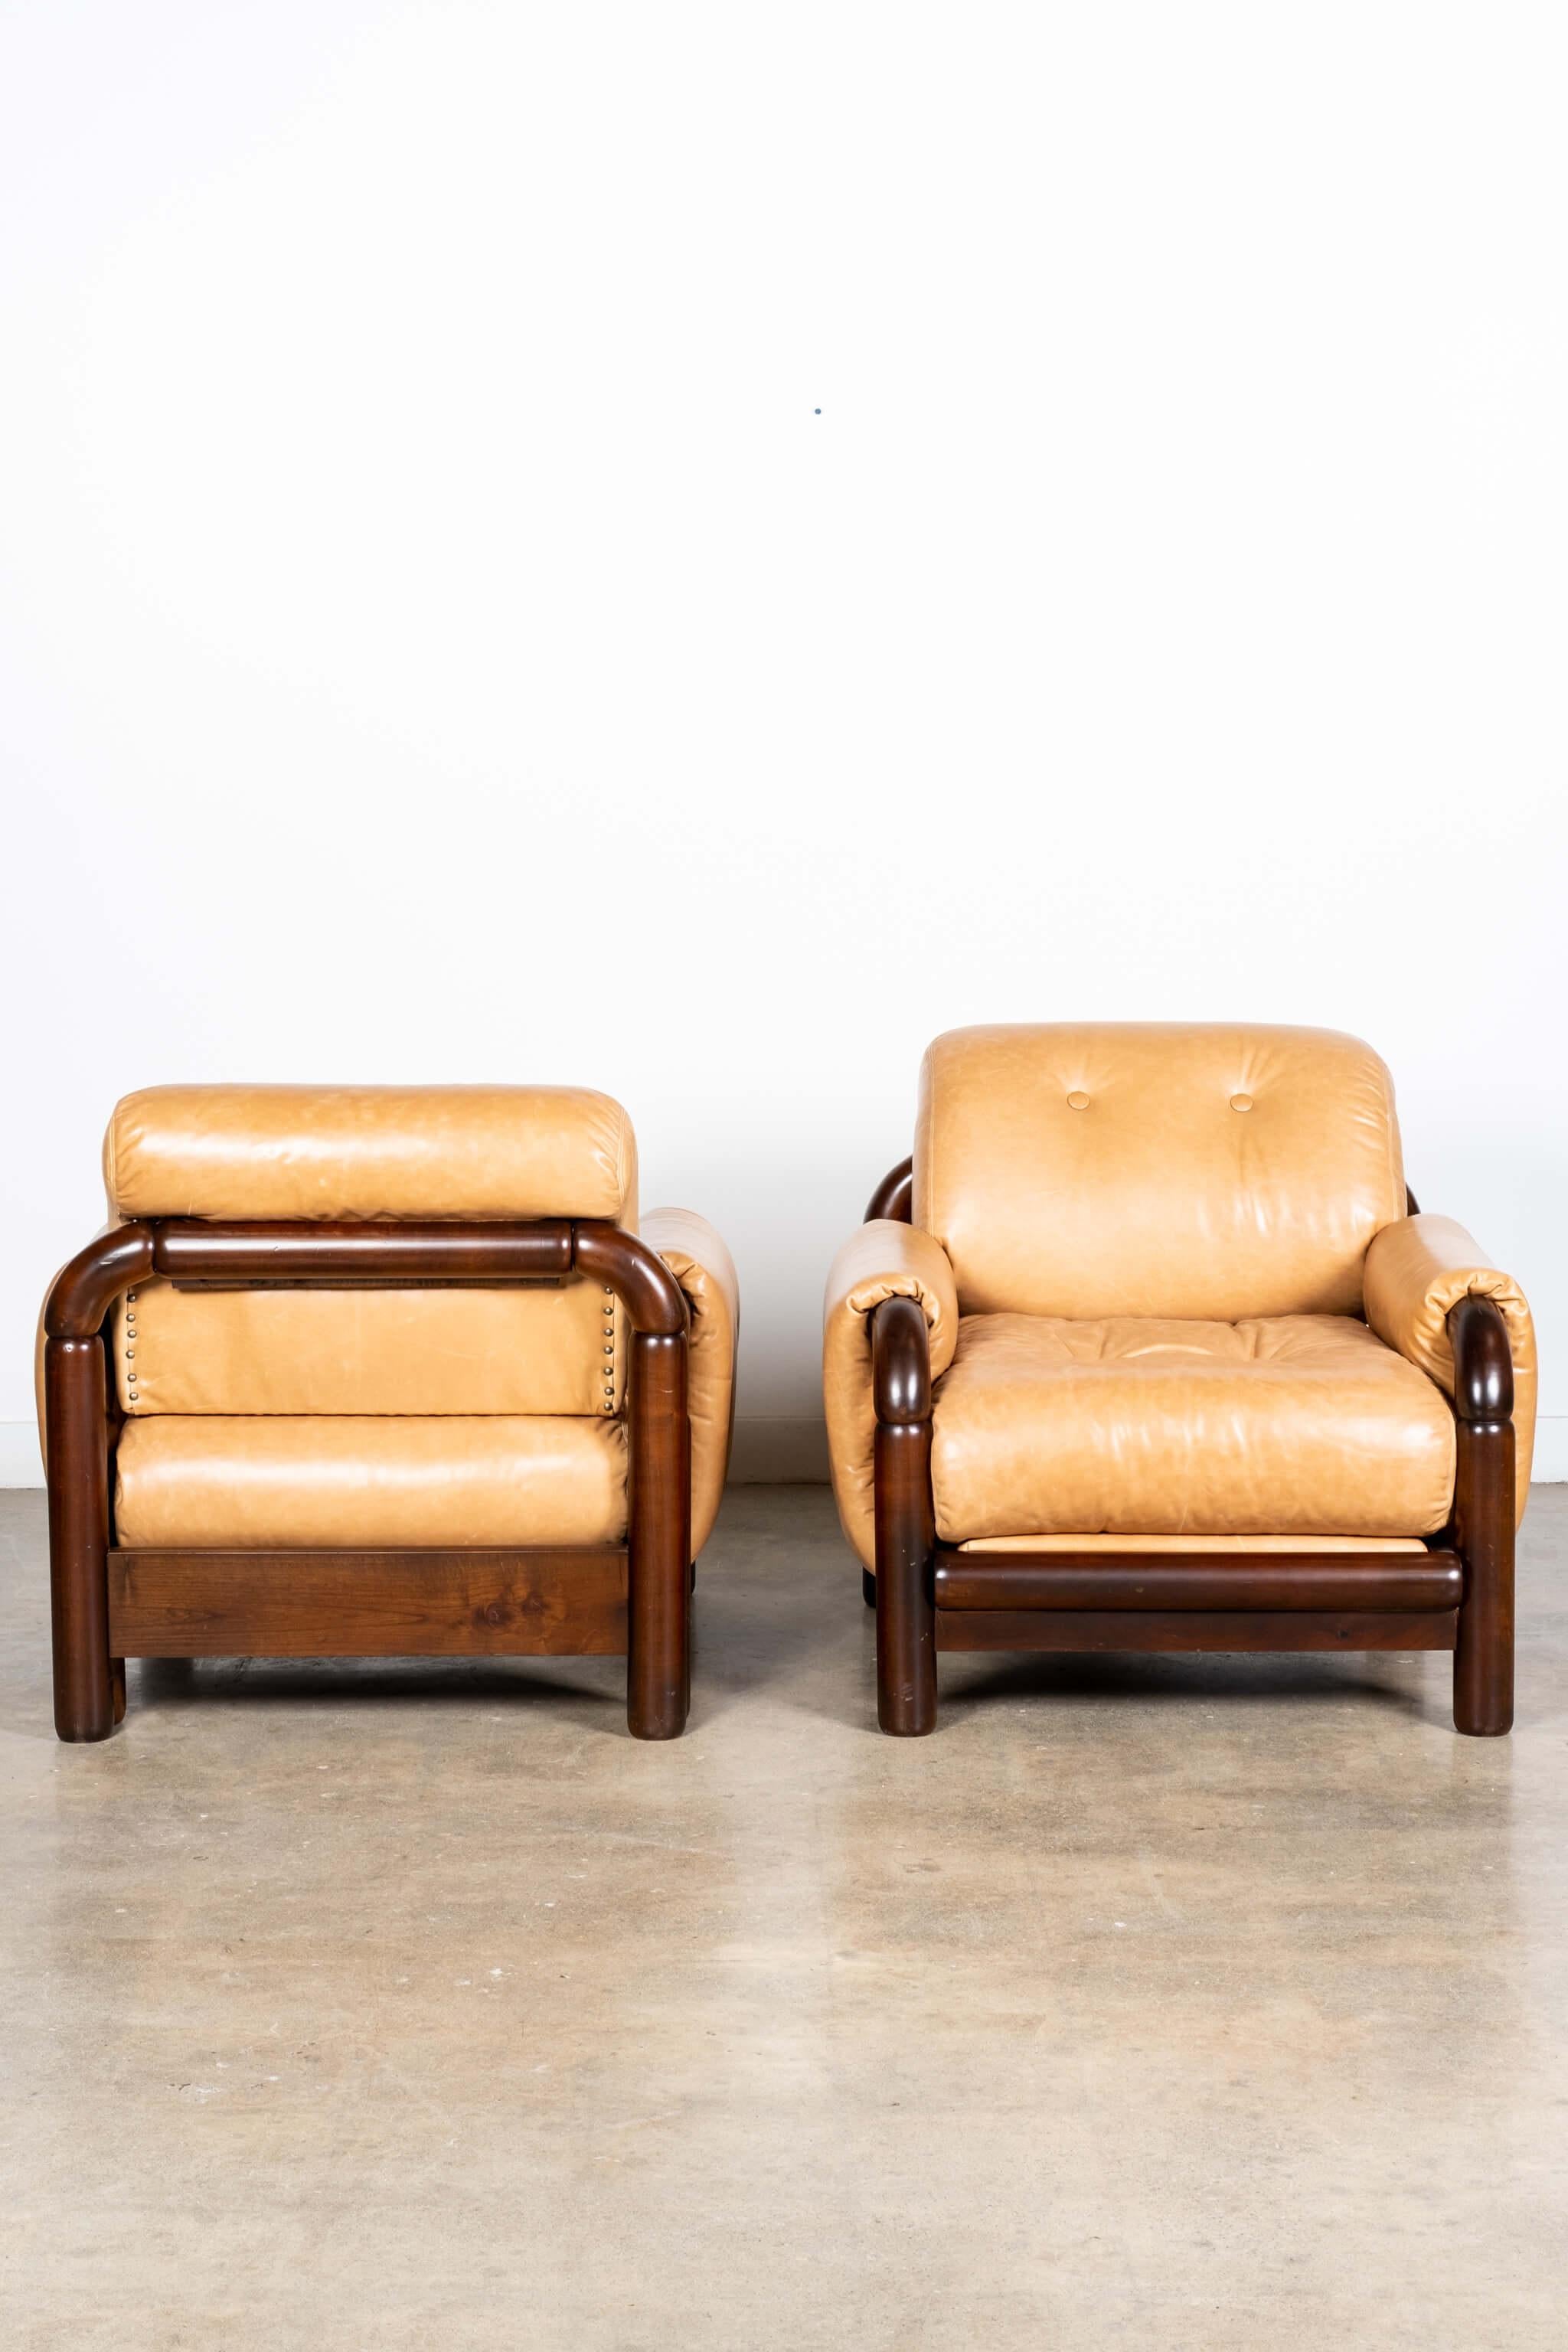 Late 20th Century Pair of Brazilian Leather Armchairs For Sale